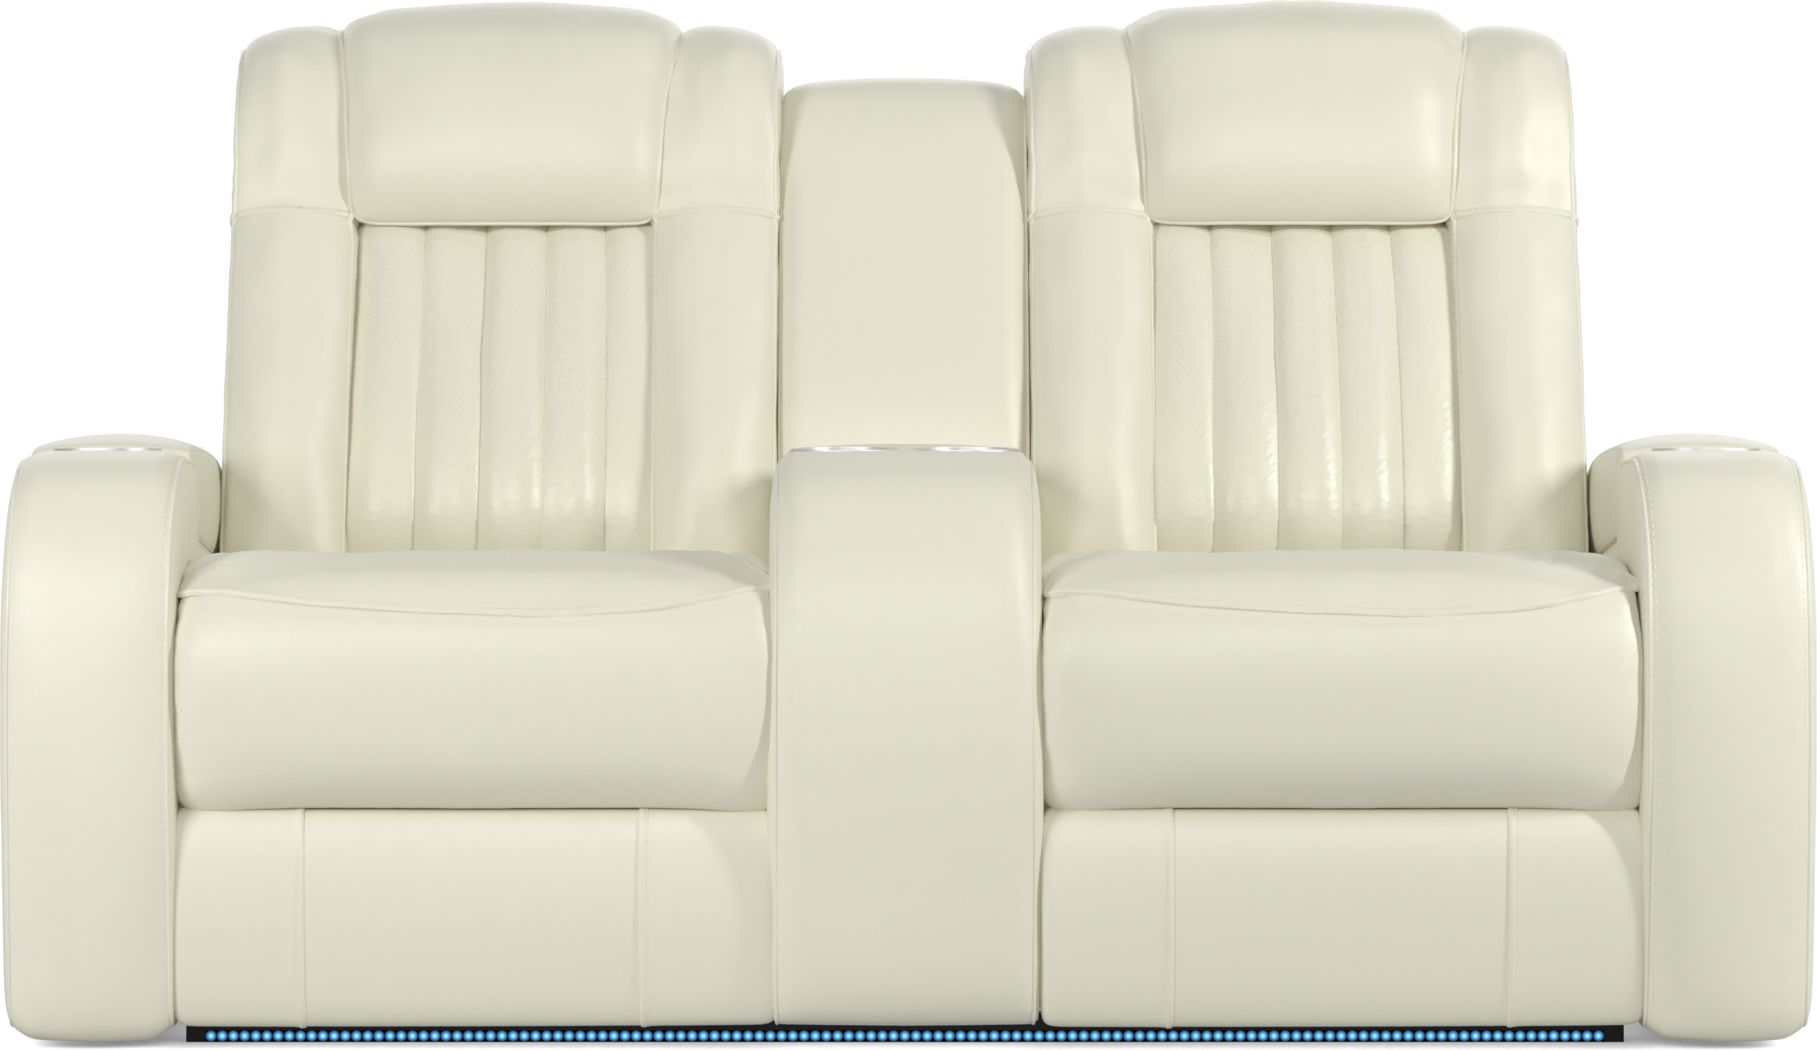 Leather Loveseats For Reclining, Ivory Leather Loveseat